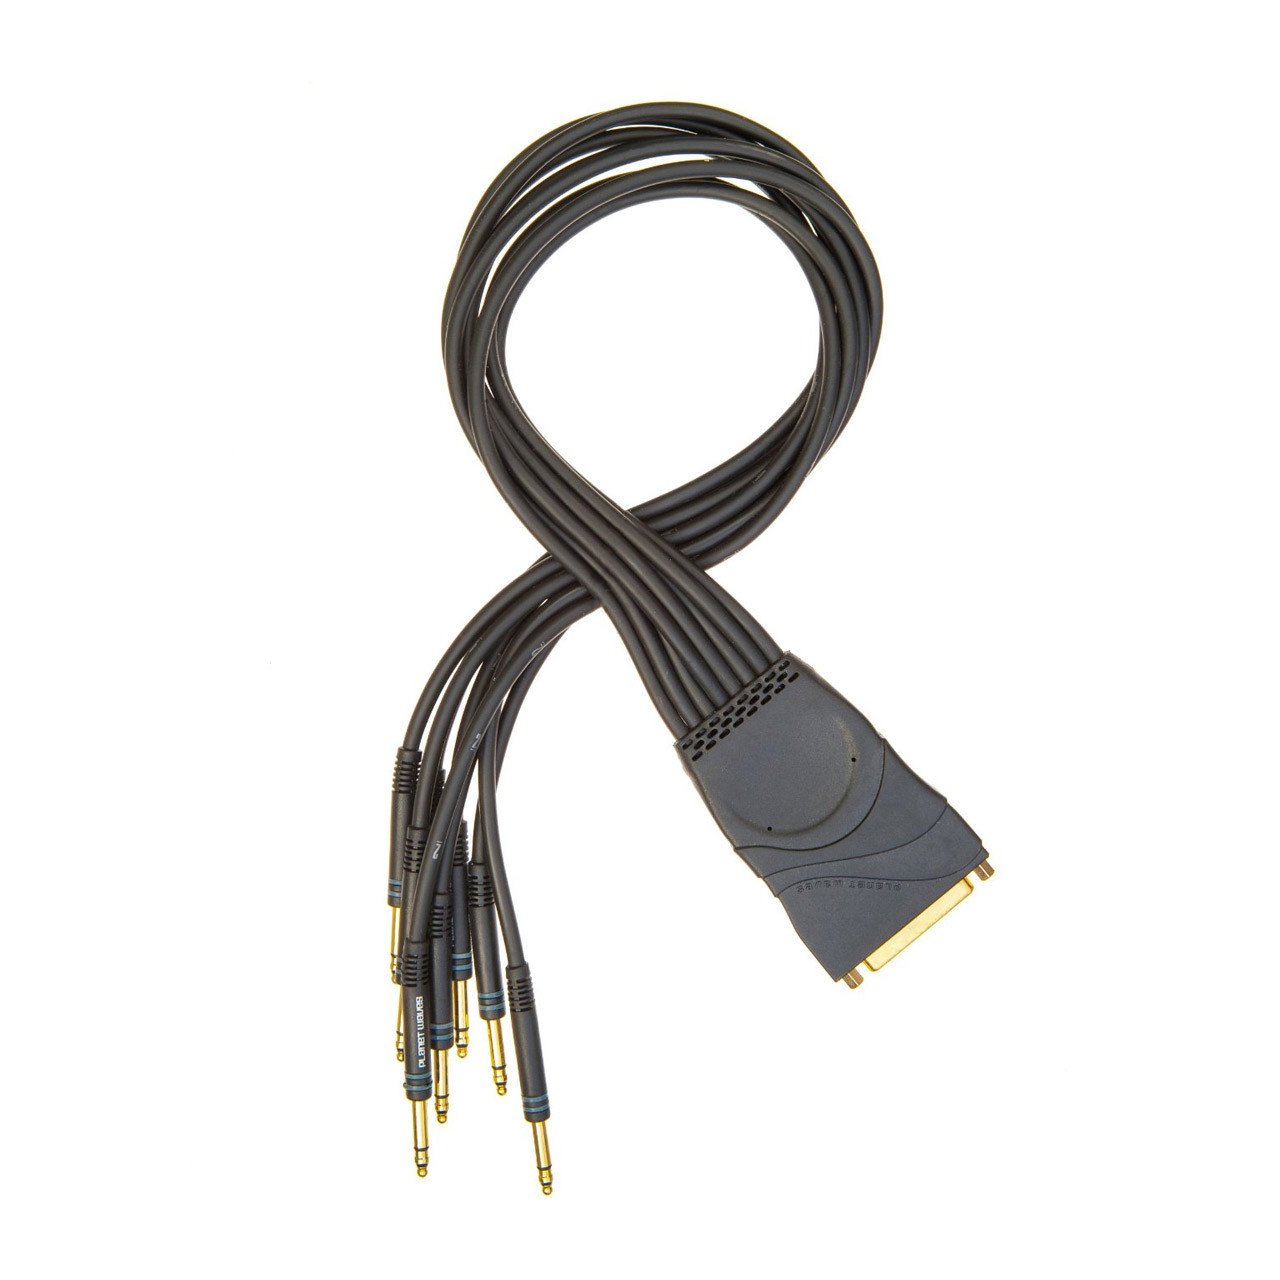 Cables & Adapters - Planet Waves DB25 To Bantam/TT Modular Snake Breakout Cable